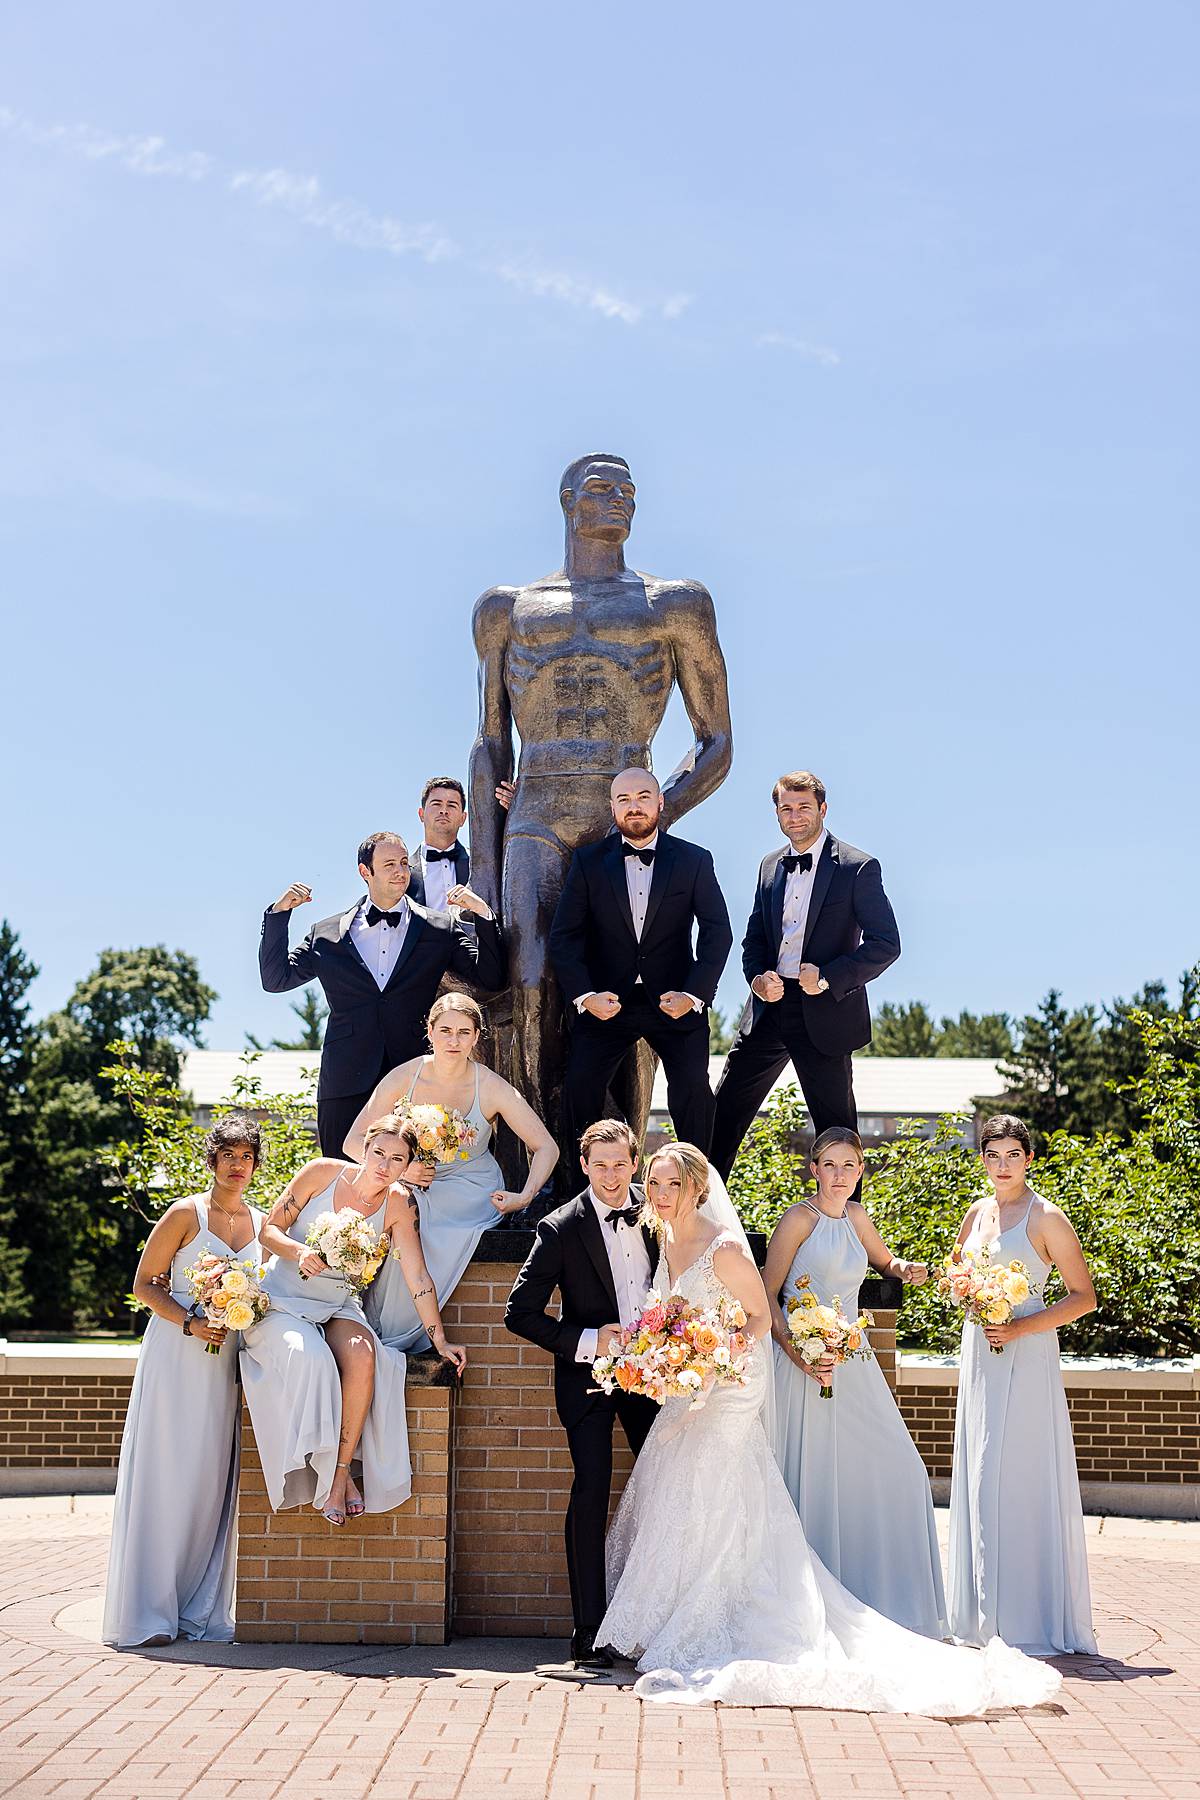 Michigan State University Wedding photographs at Sparty statue